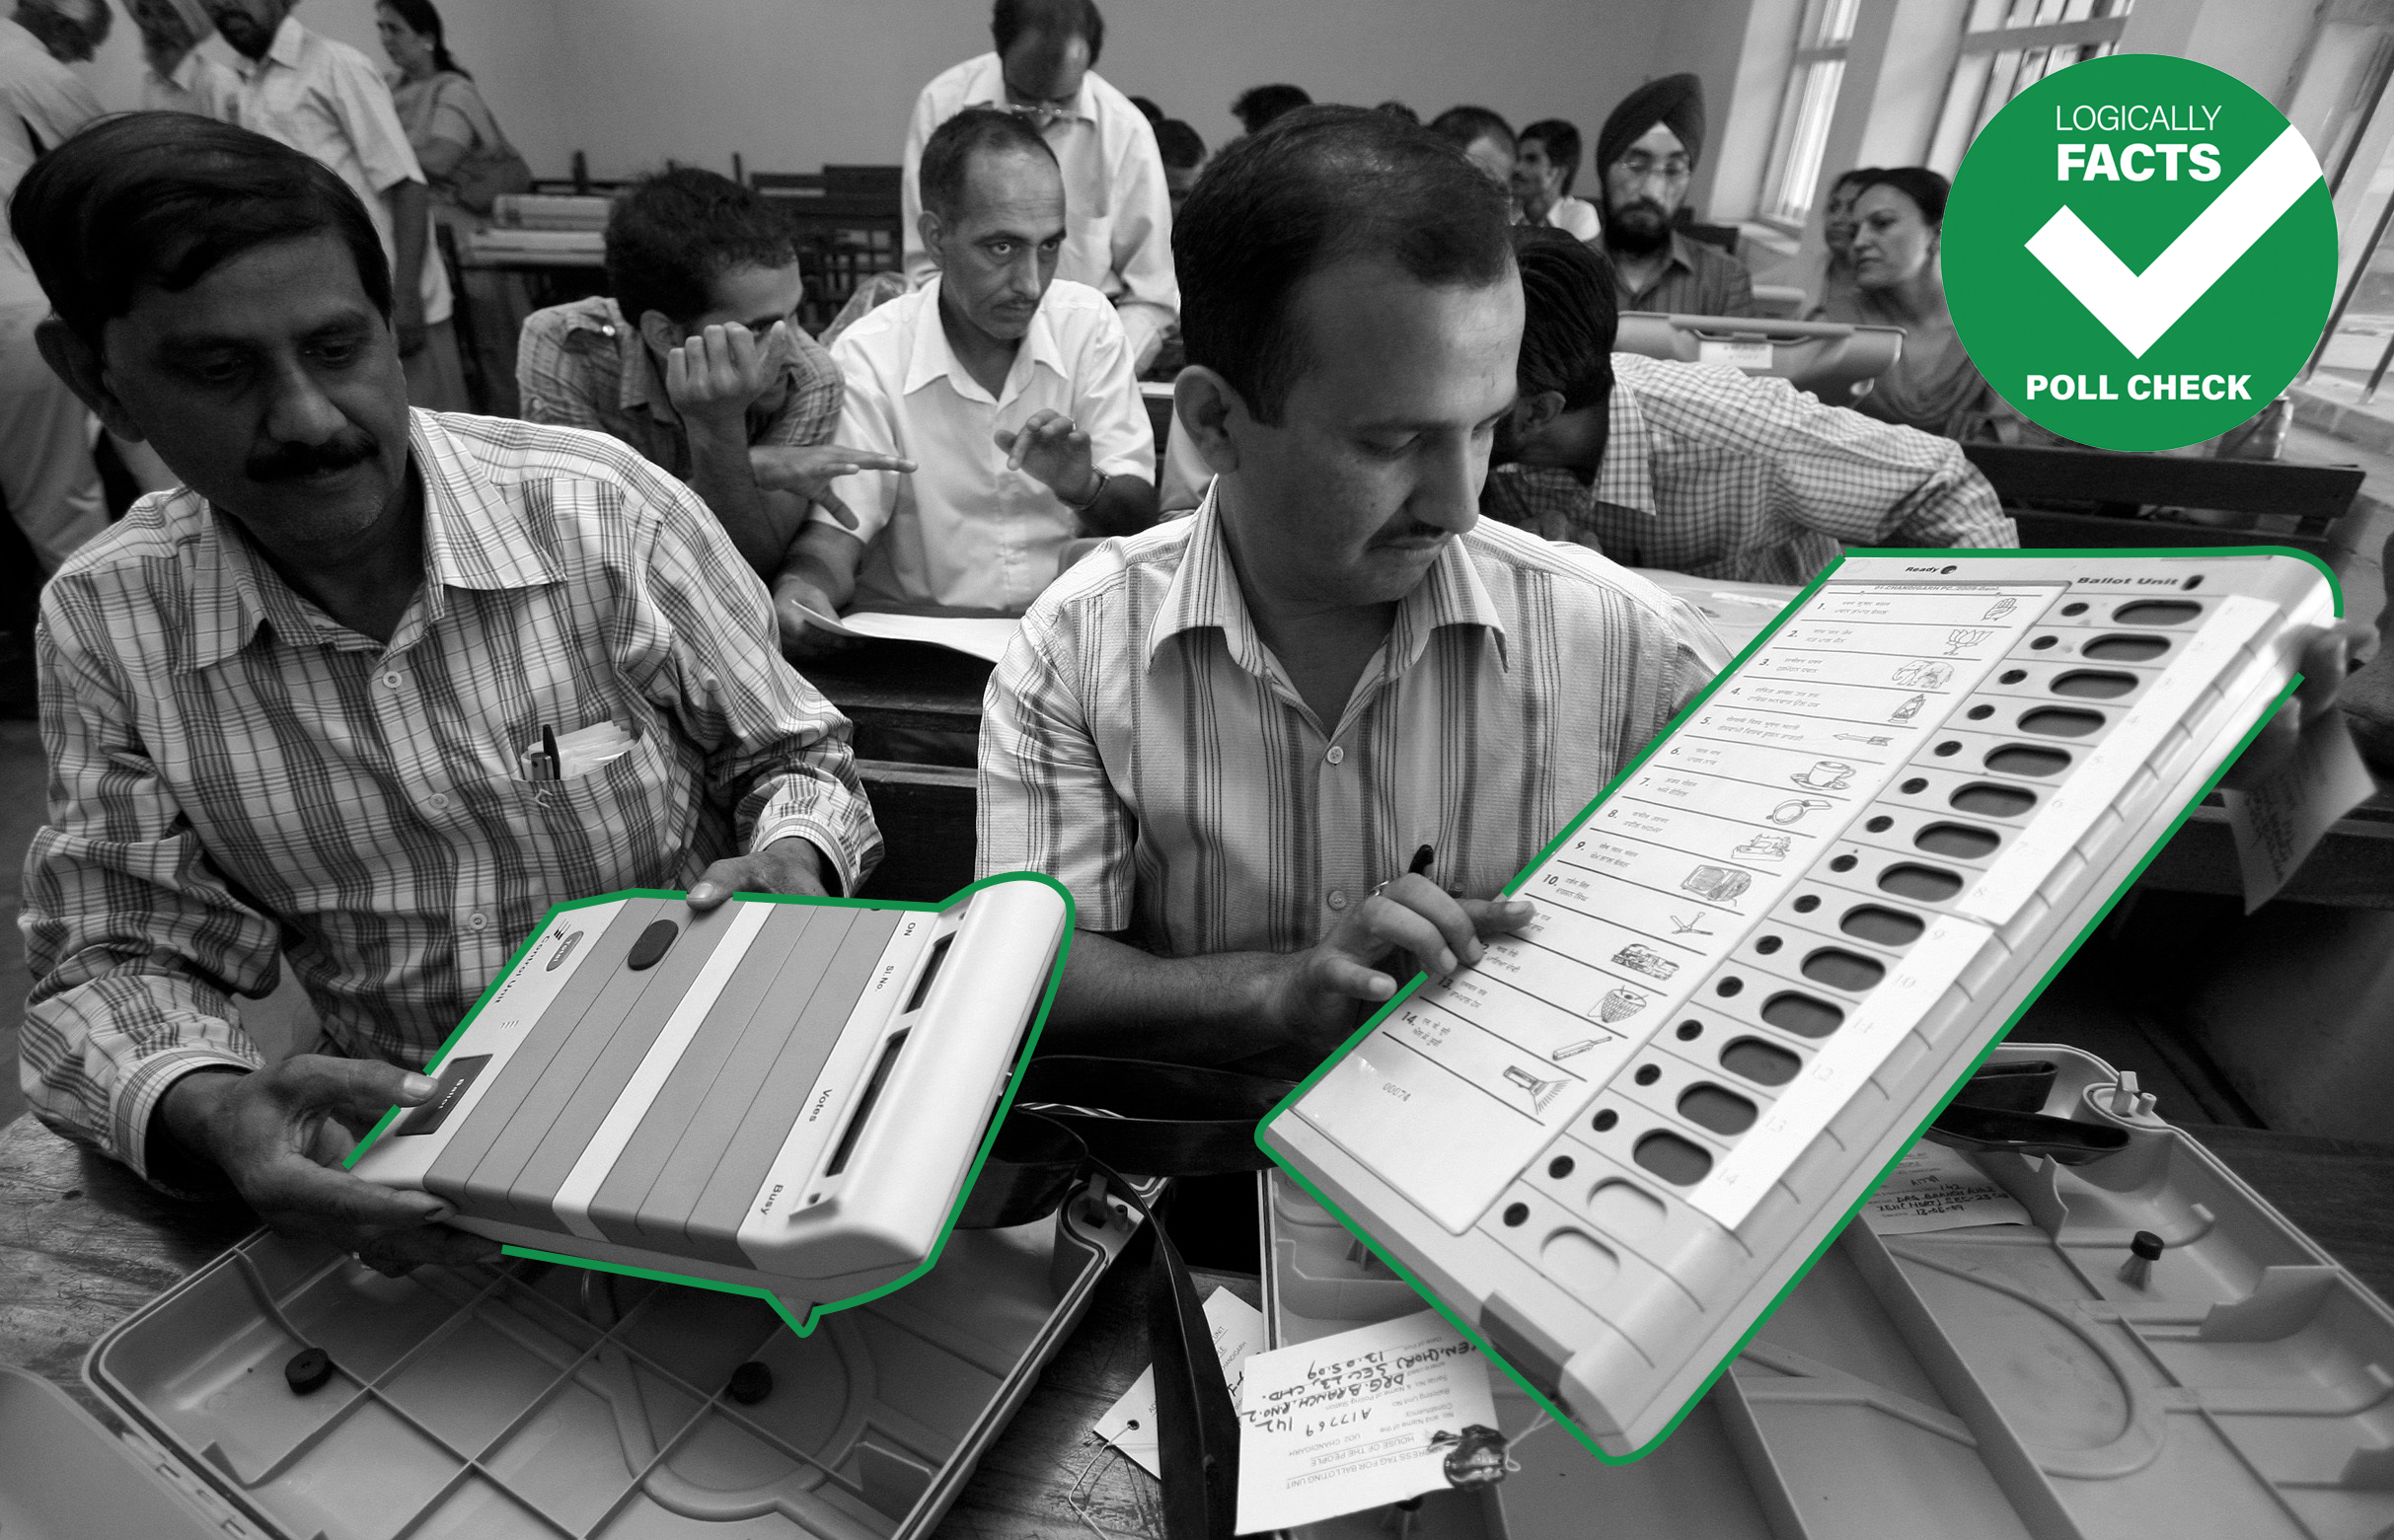 Are concerns over Electronic Voting Machines valid? Indian election experts address transparency issues